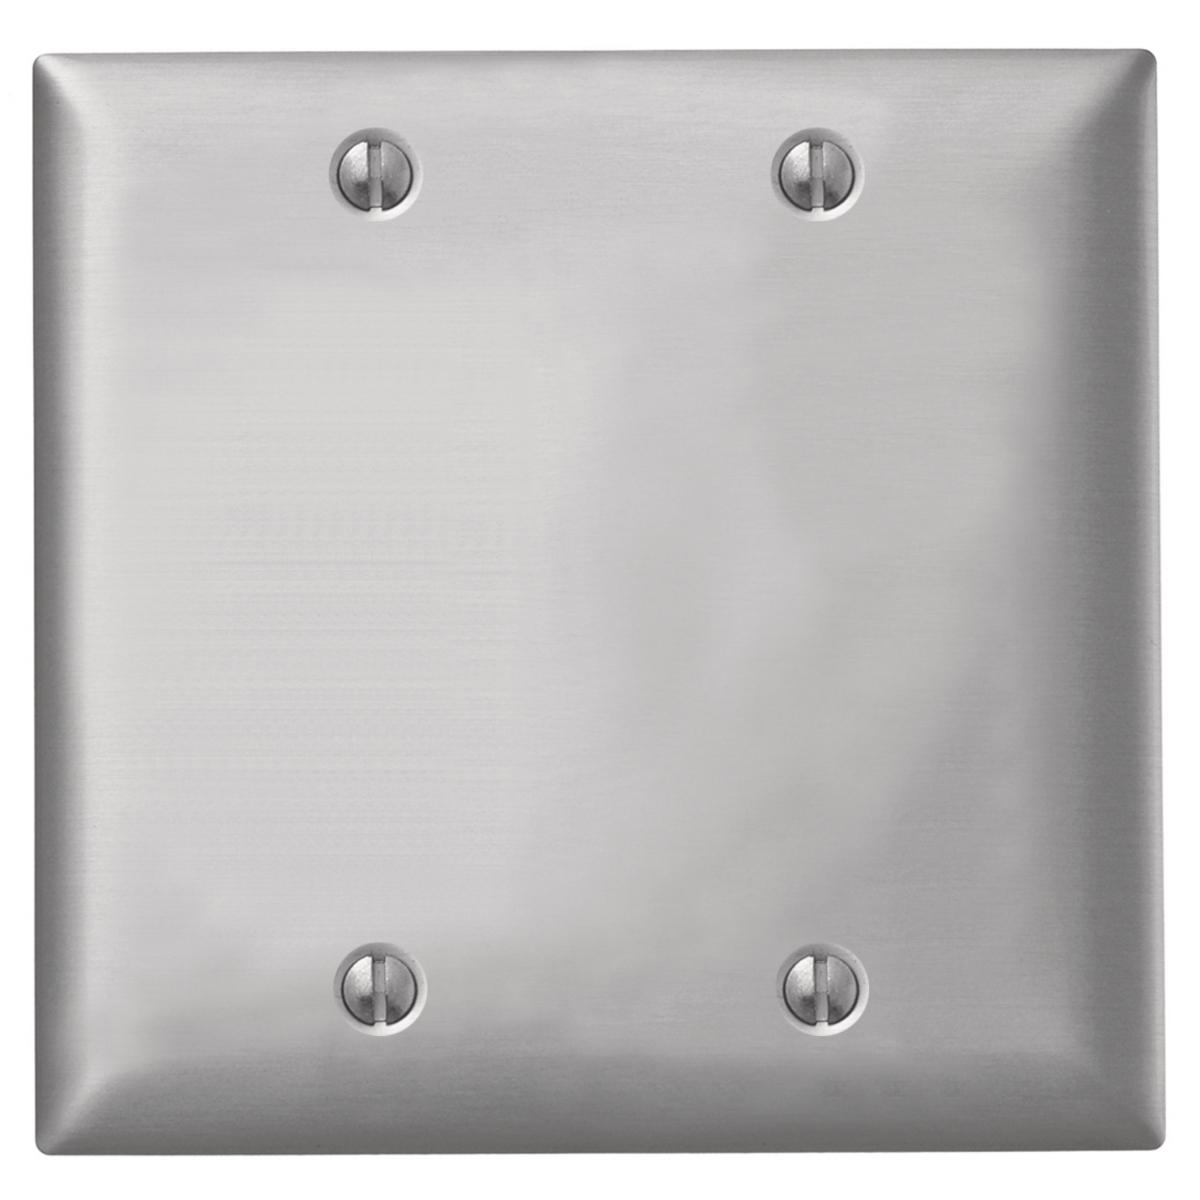 Hubbell SA23 Wallplates and Boxes, Metallic Plates, 2- Gang, Blank, Standard Size, Aluminum  ; Non-magnetic and corrosion resistant ; Finish is lacquer coated to inhibit oxidation ; Protective plastic film helps to prevent scratches and damage ; Protective film helps 